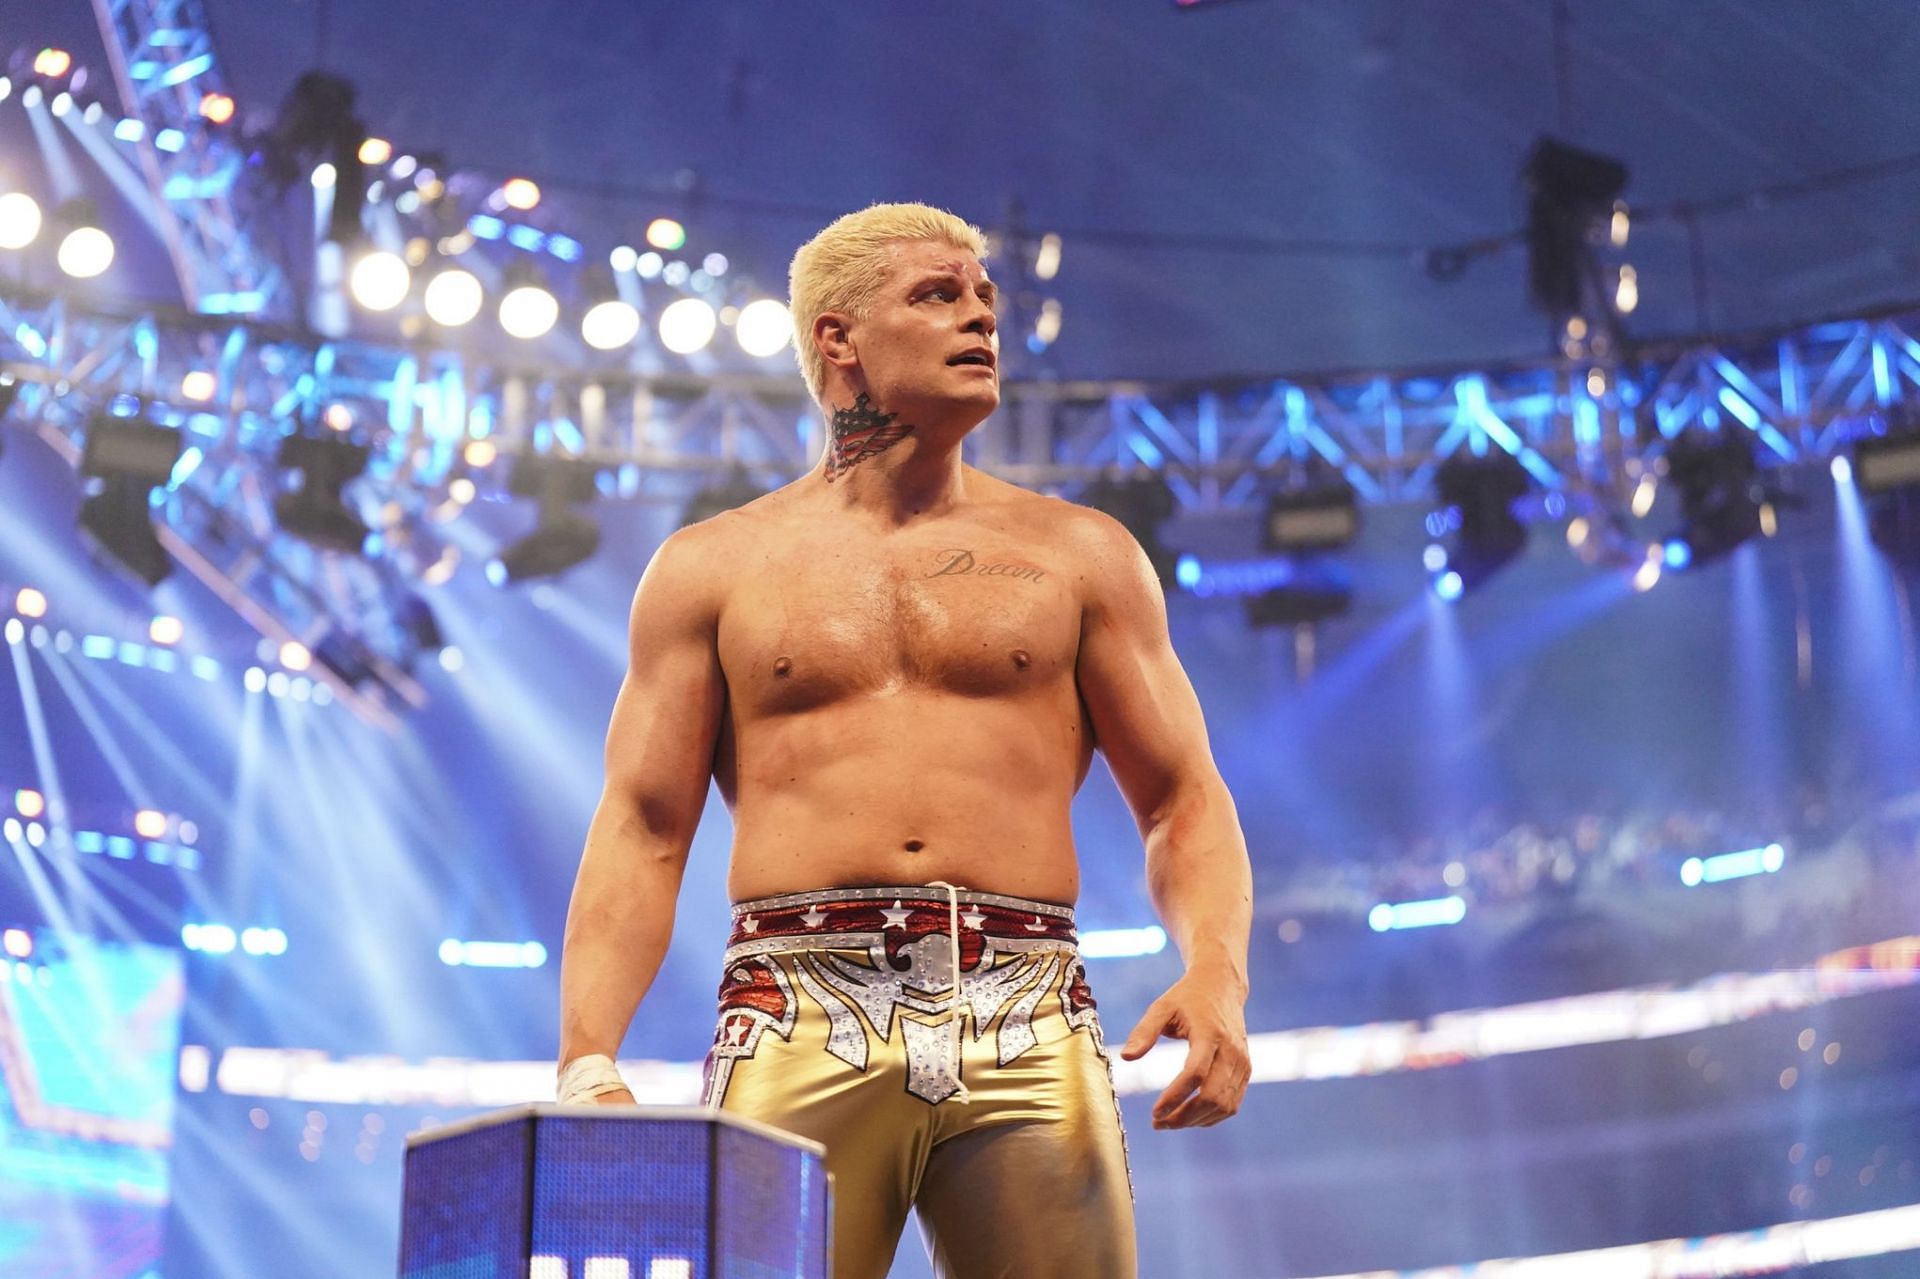 Cody Rhodes recently returned to WWE after six years